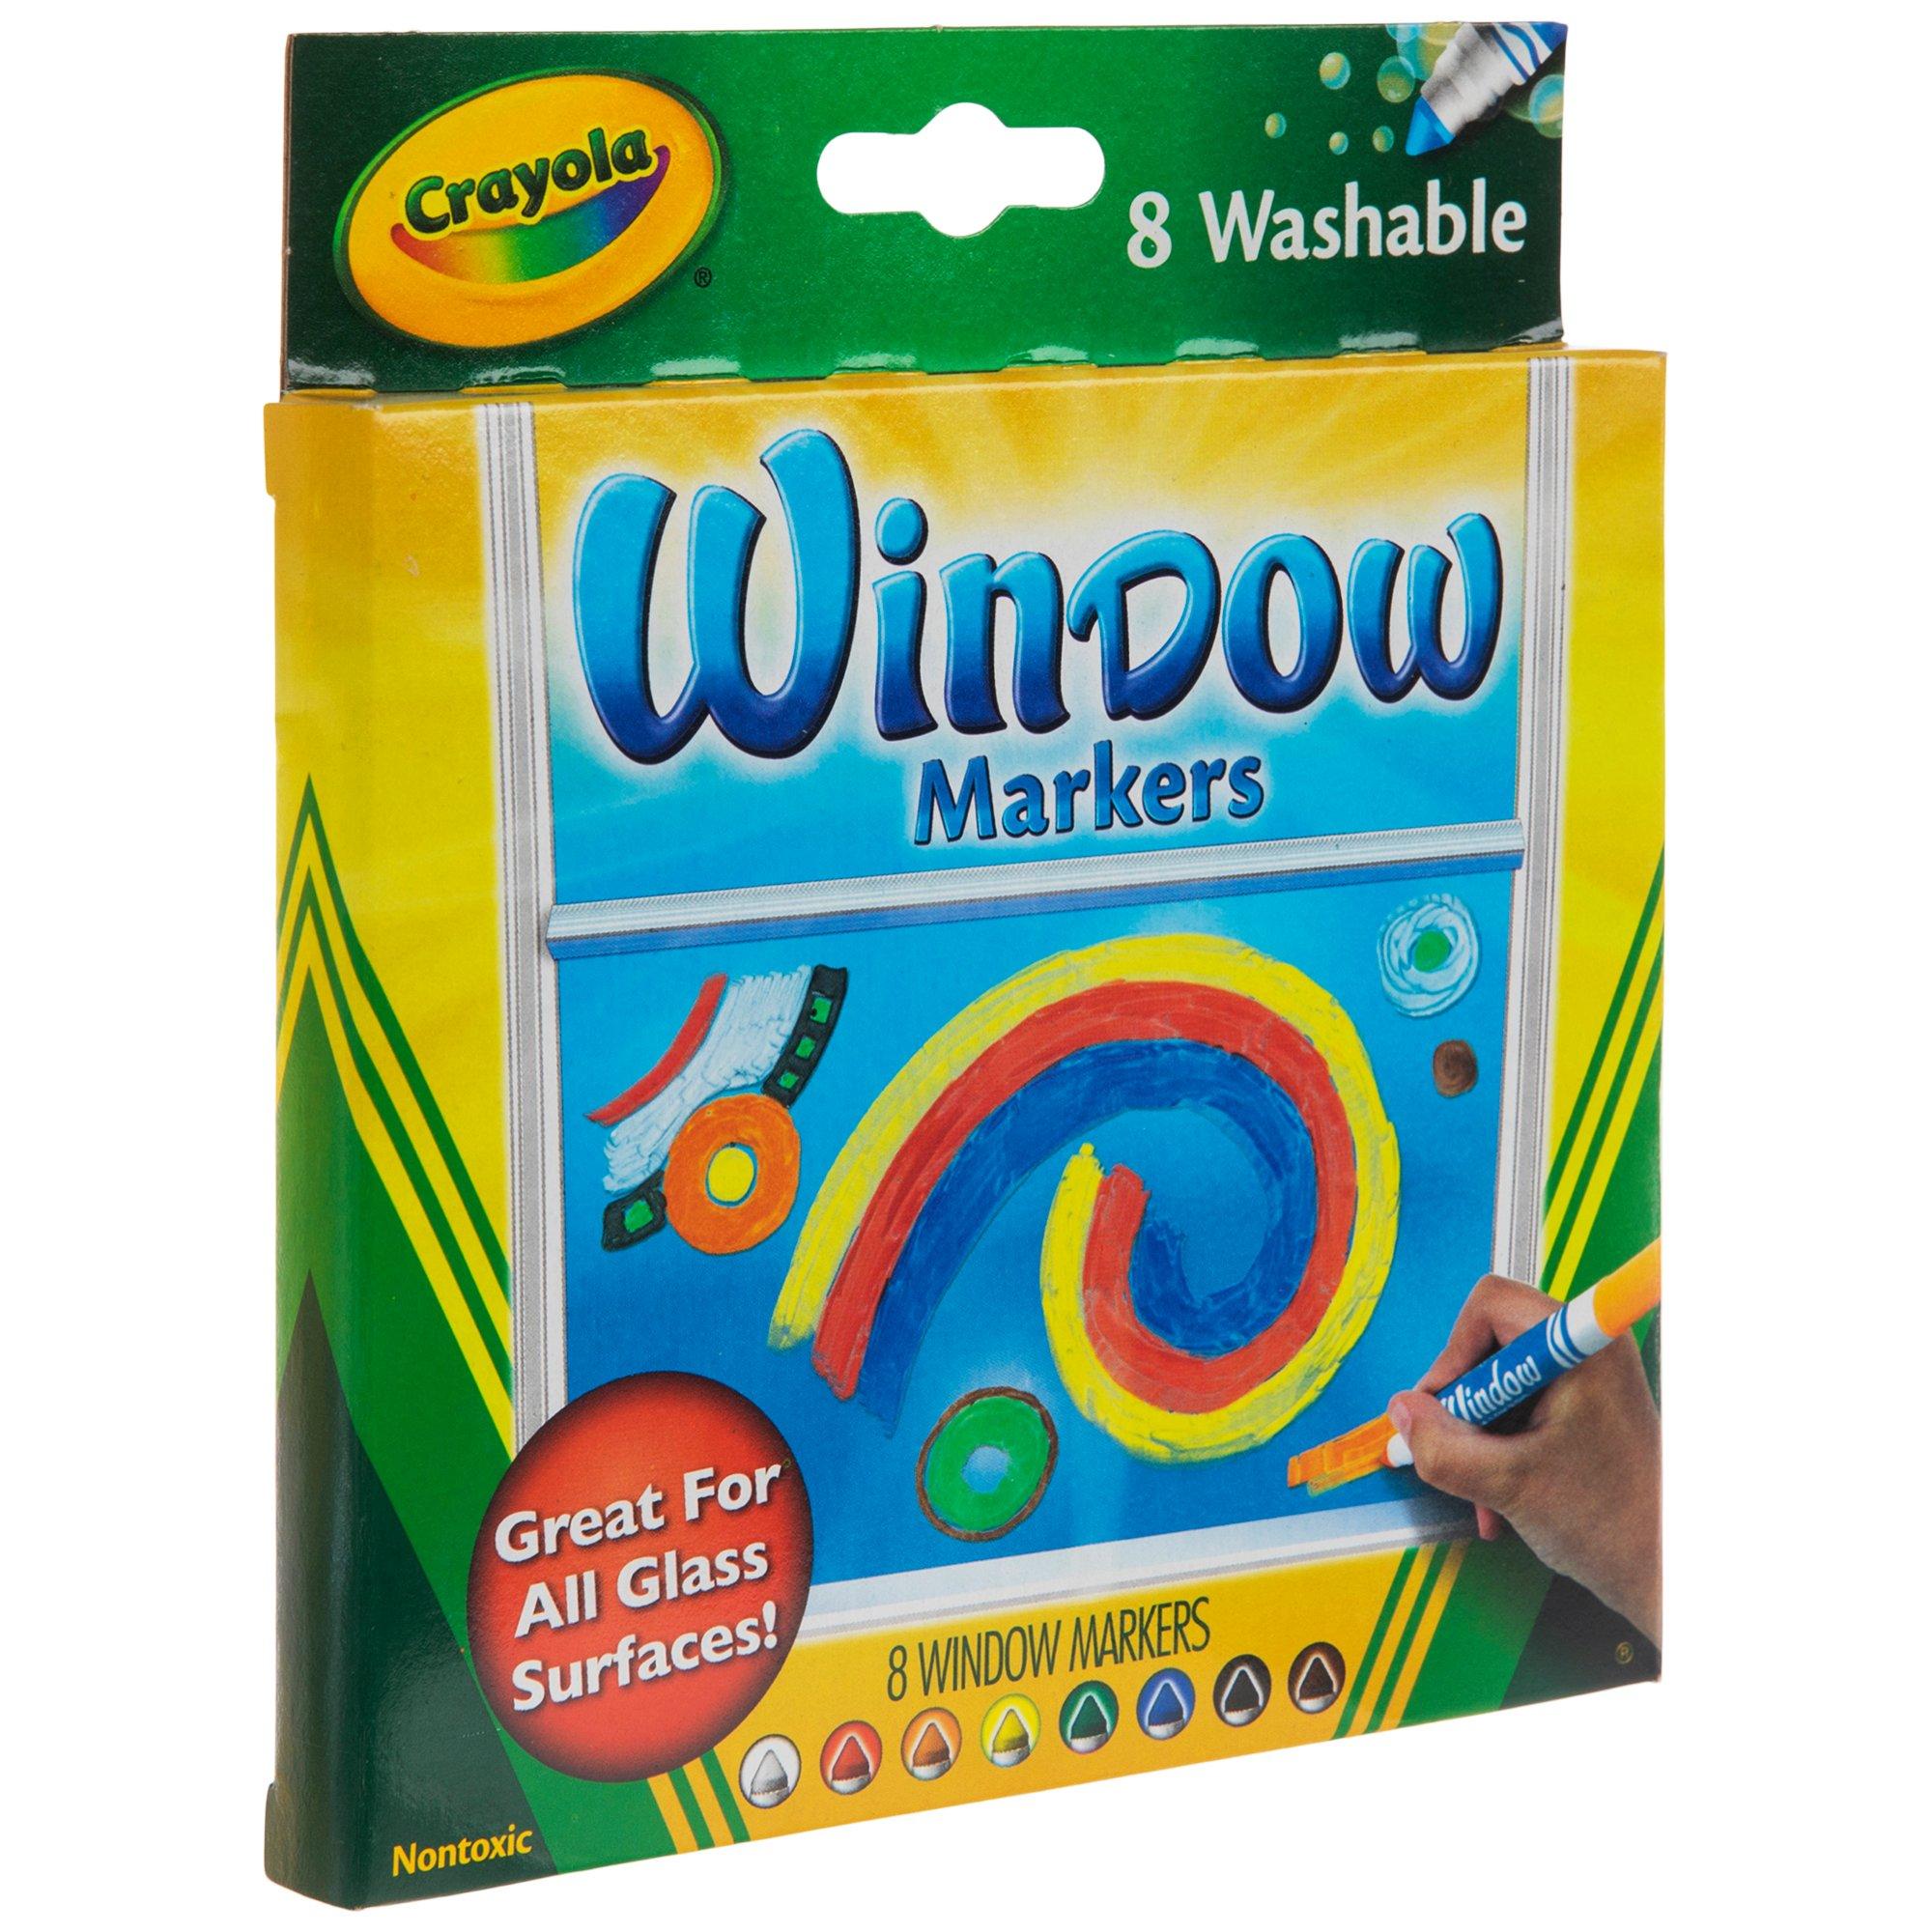 Crayola Washable Window Markers-Assorted Colors 8/Pkg - 071662081652